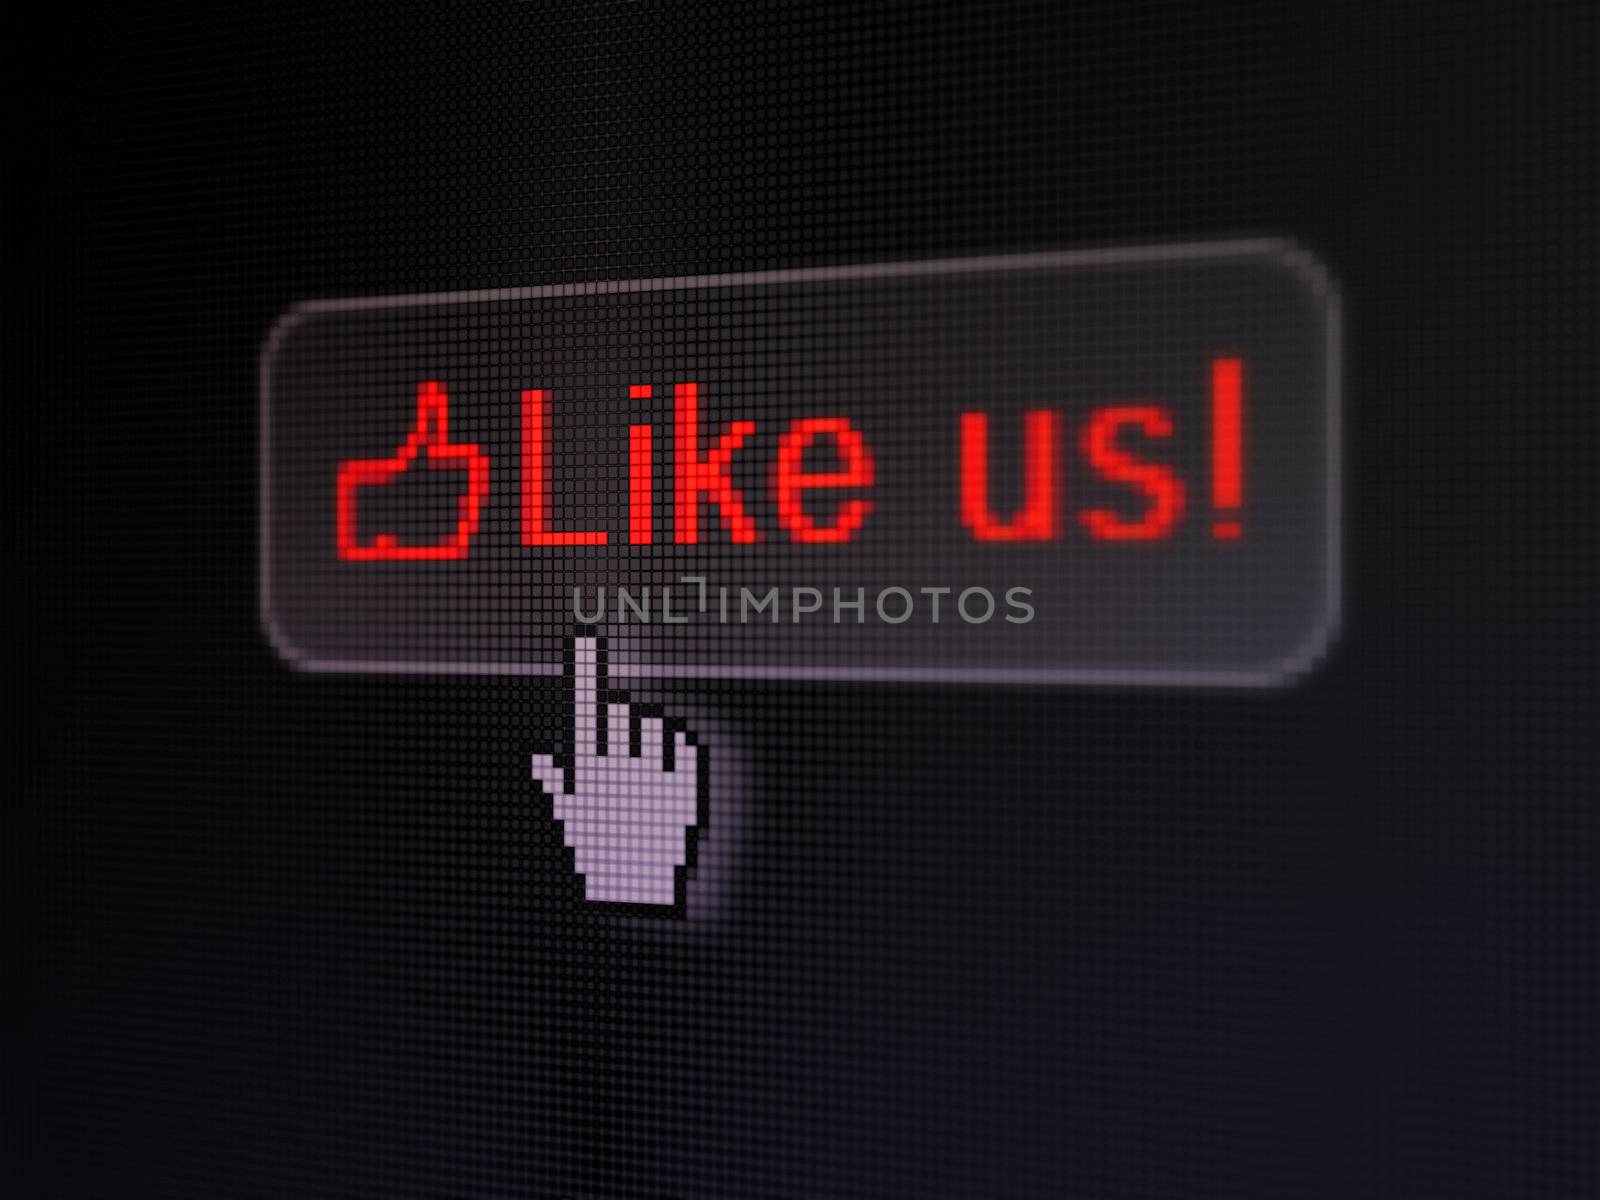 Social network concept: pixelated words Like us! and Like icon on button whis cursor on digital computer screen background, selected focus